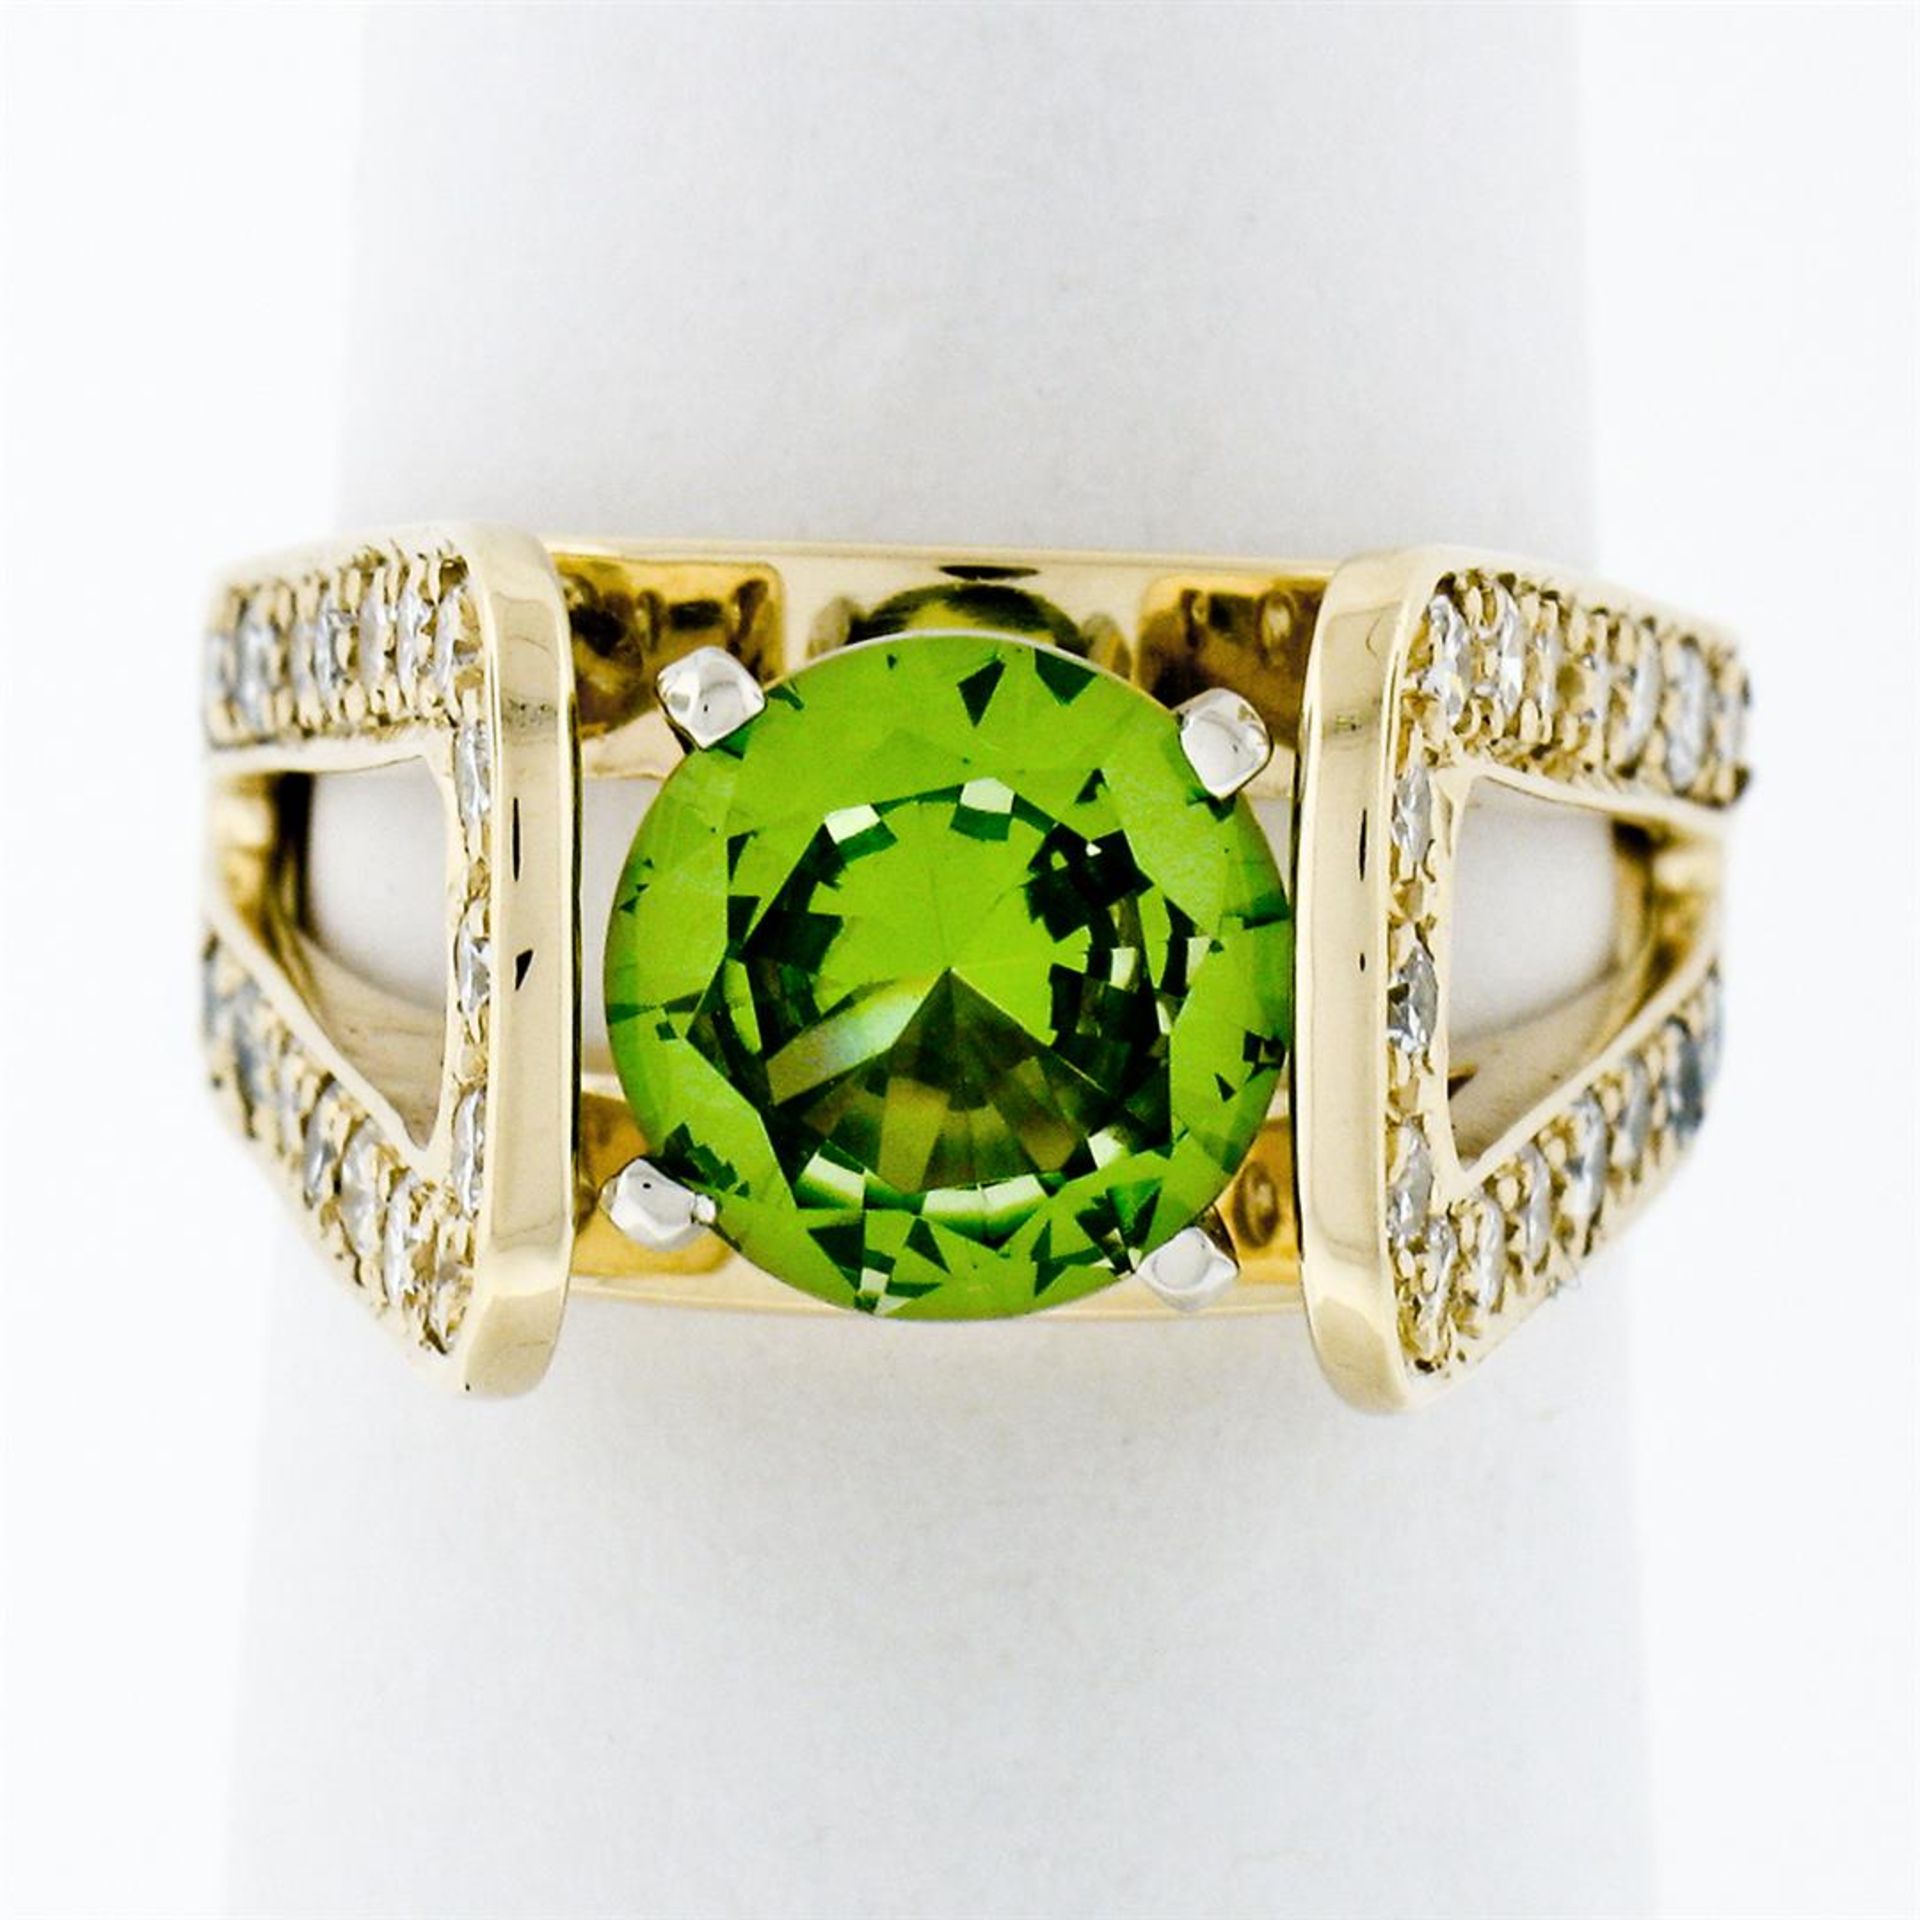 14k Yellow Gold 3.0ctw Round Peridot Solitaire & Ideal Cut Diamond Cocktail Ring - Image 4 of 9